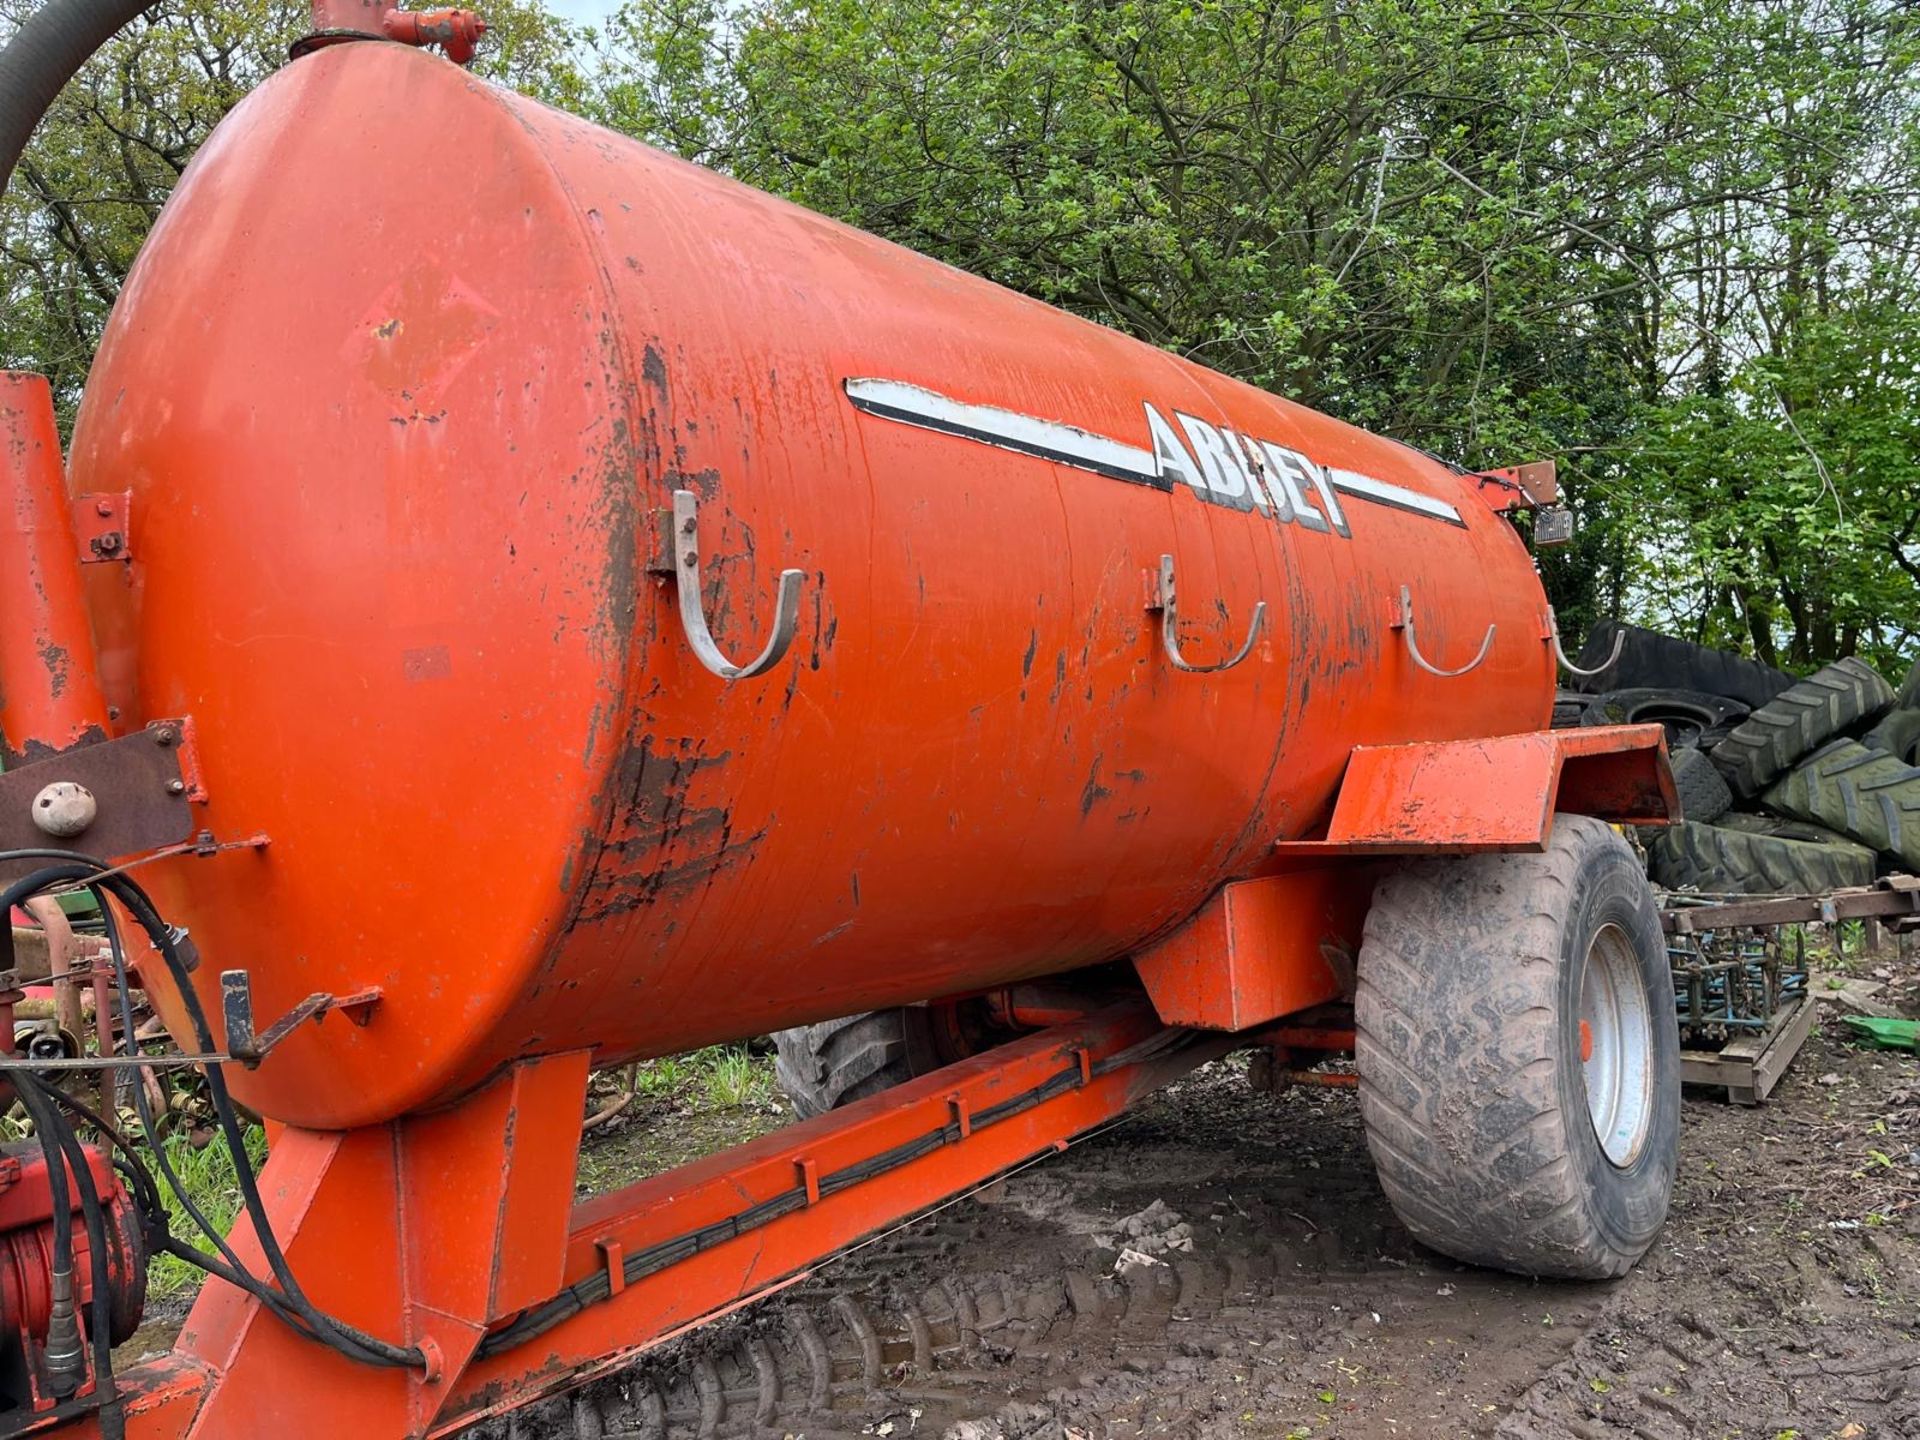 ABBEY 2000 GALLONS SLURRY TANKER